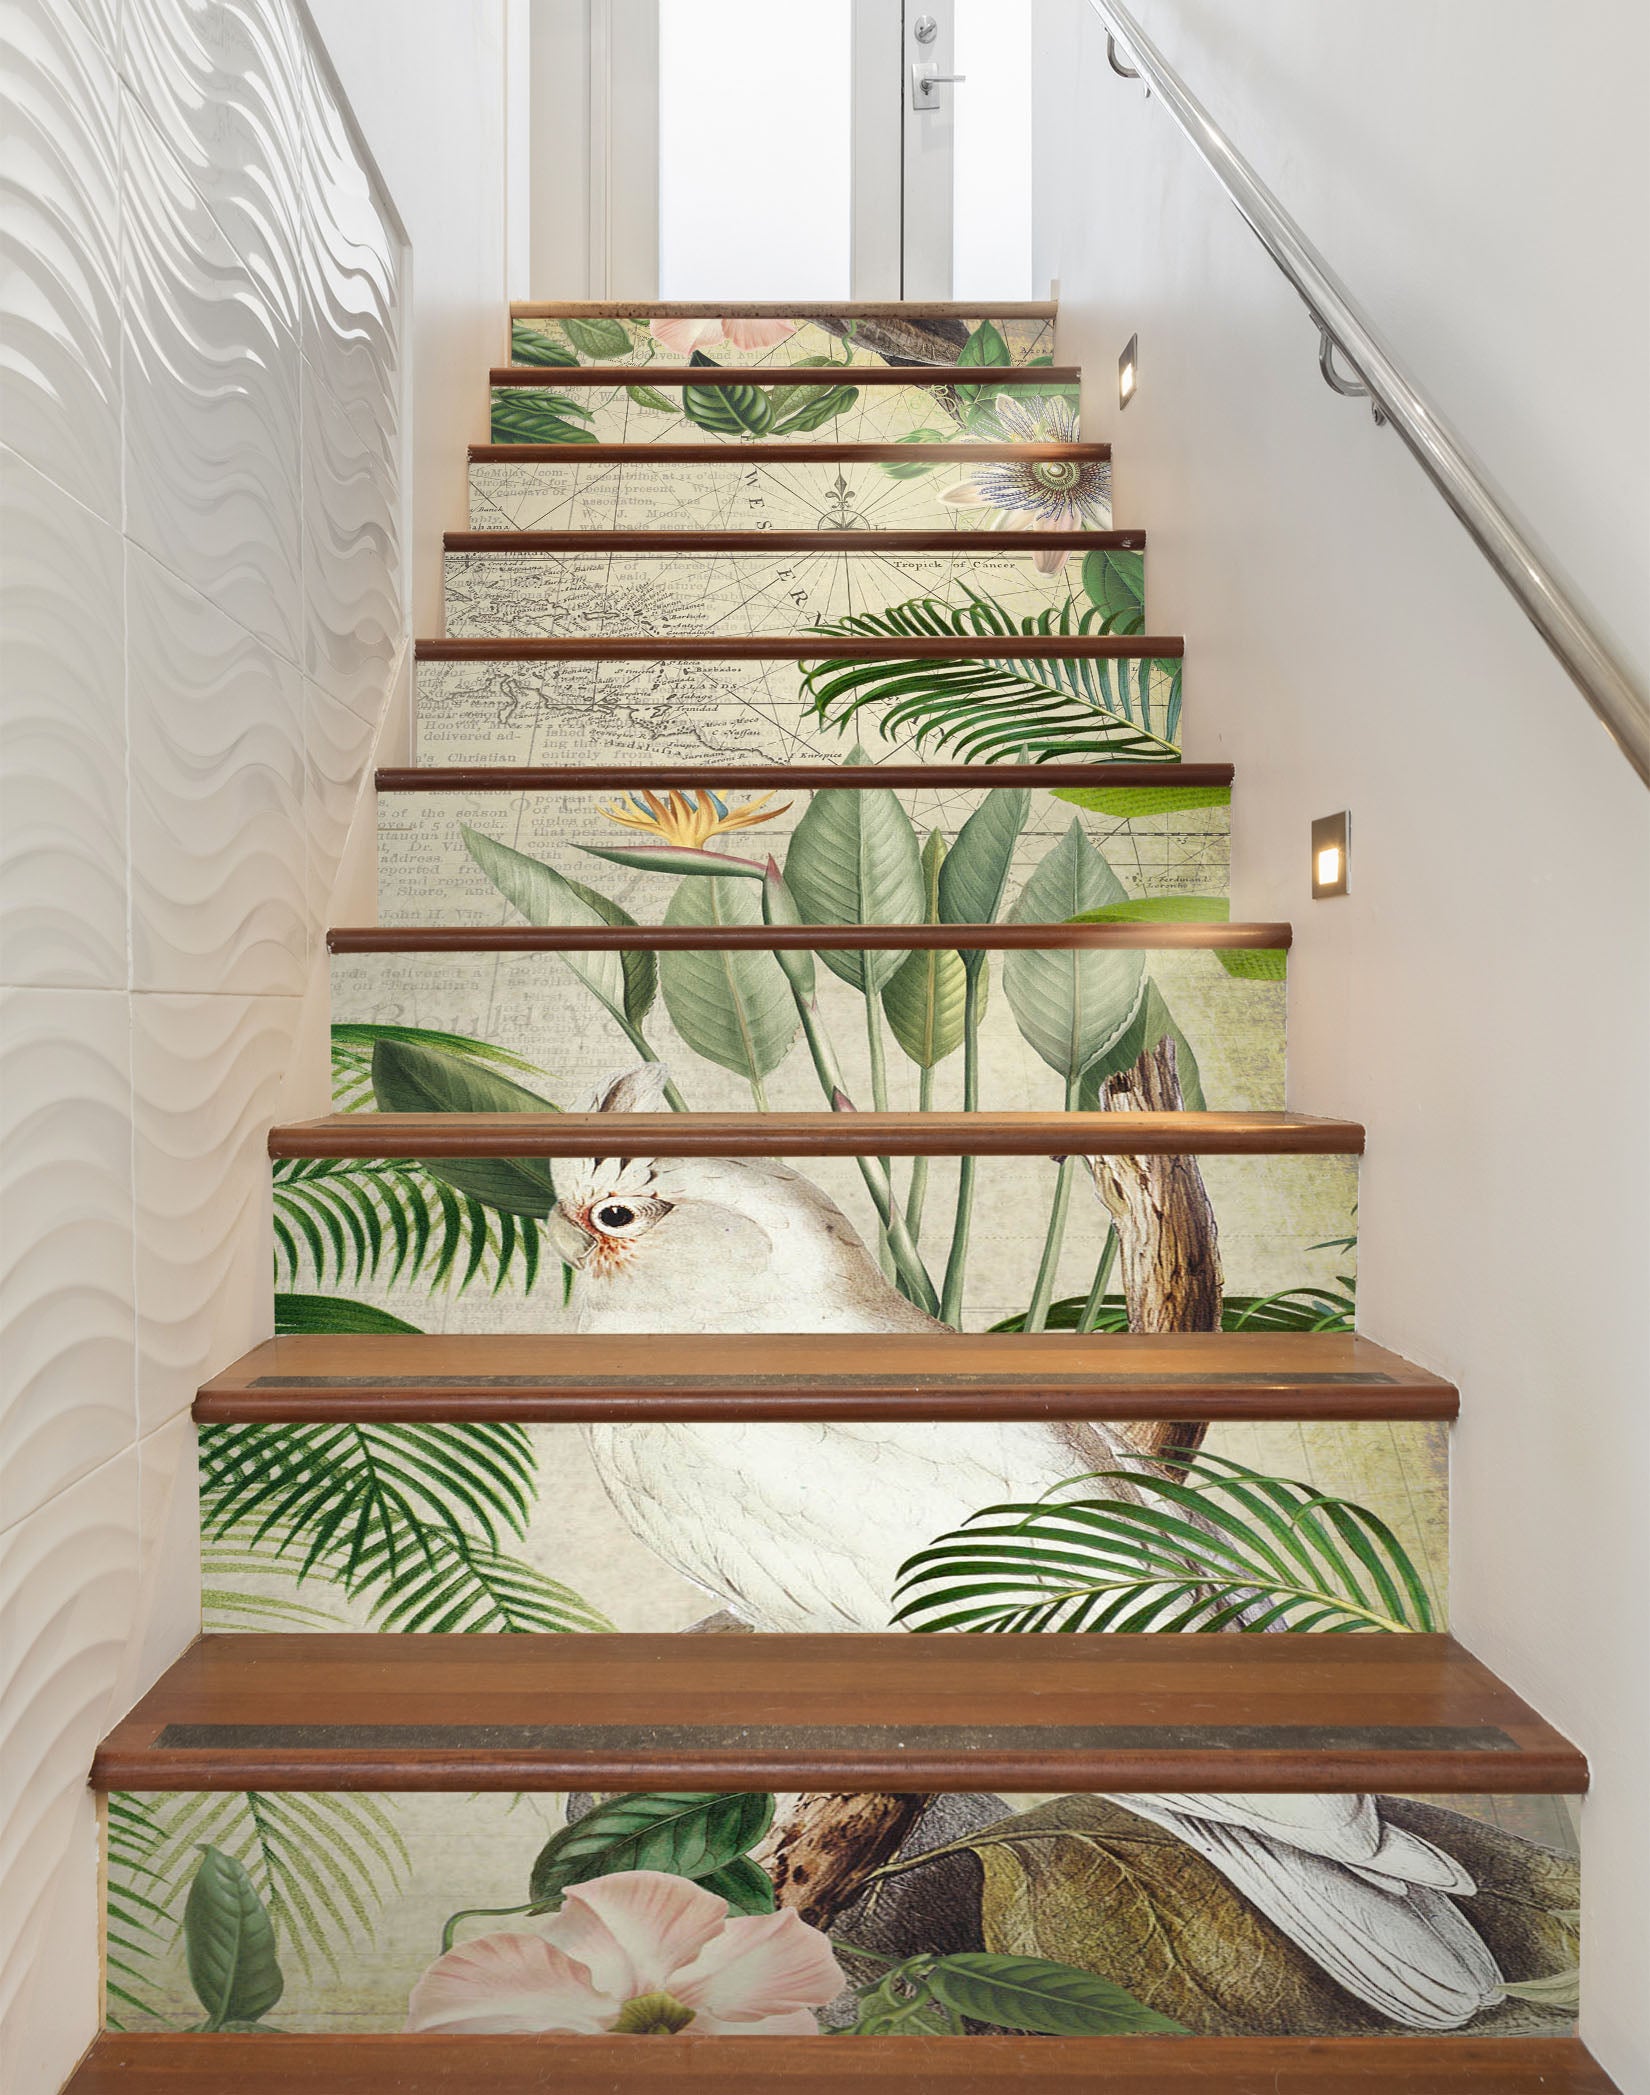 3D White Parrot Leaves 11054 Andrea Haase Stair Risers